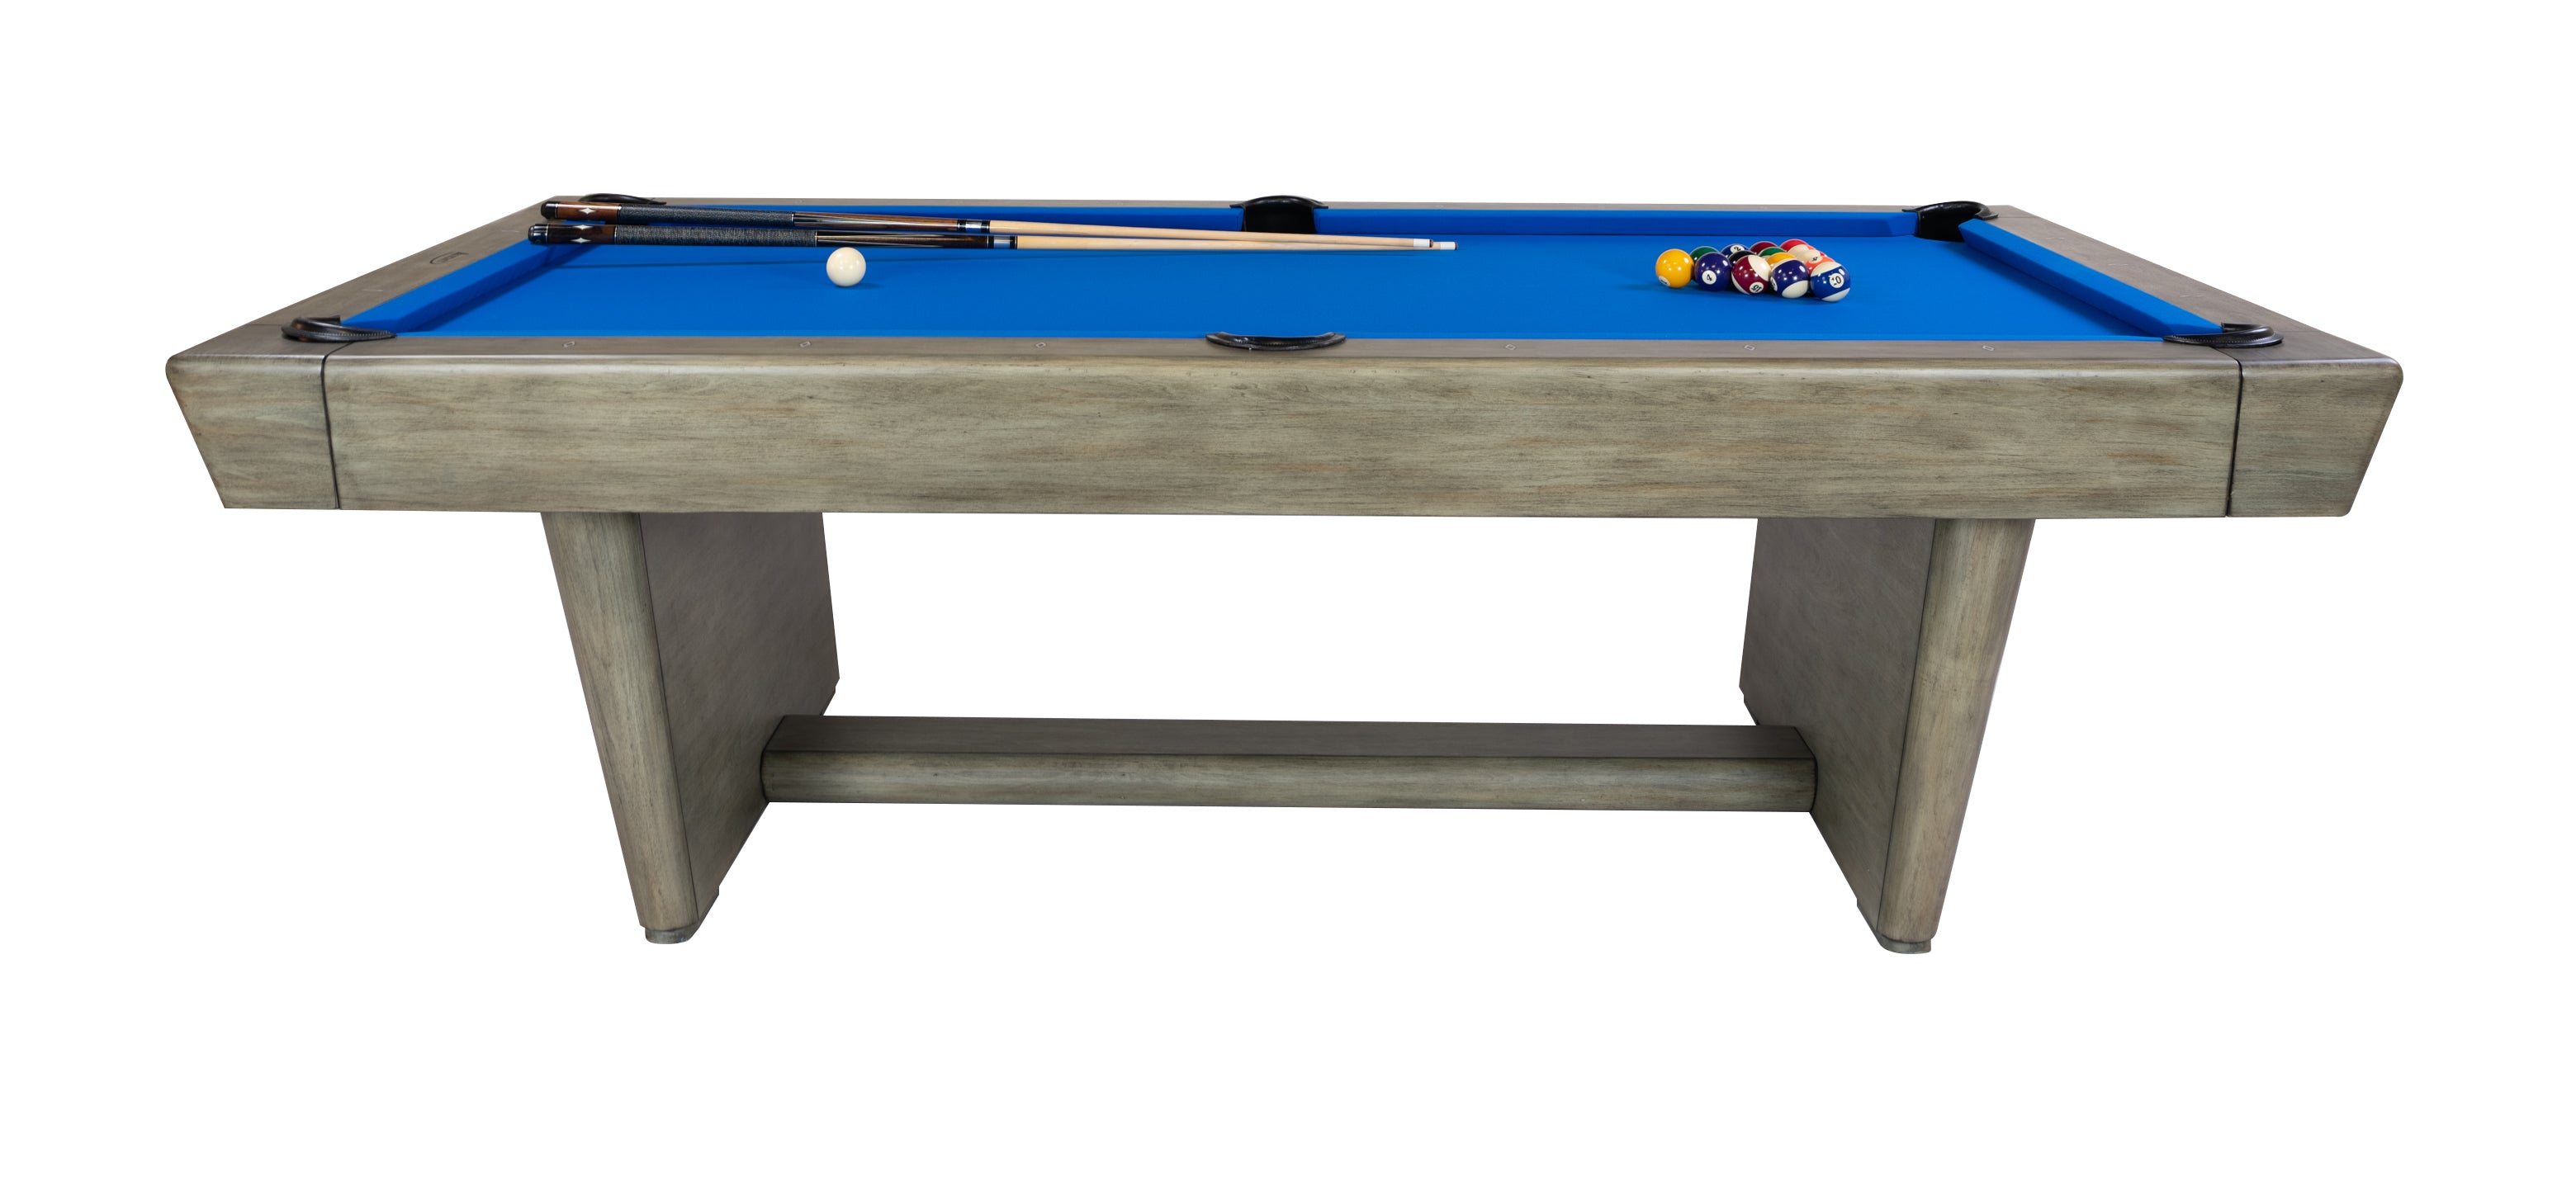 Legacy Billiards Conasauga 8 Ft Pool Table in Overcast Finish with Euro Blue Cloth with Racked Pool Balls and Cues